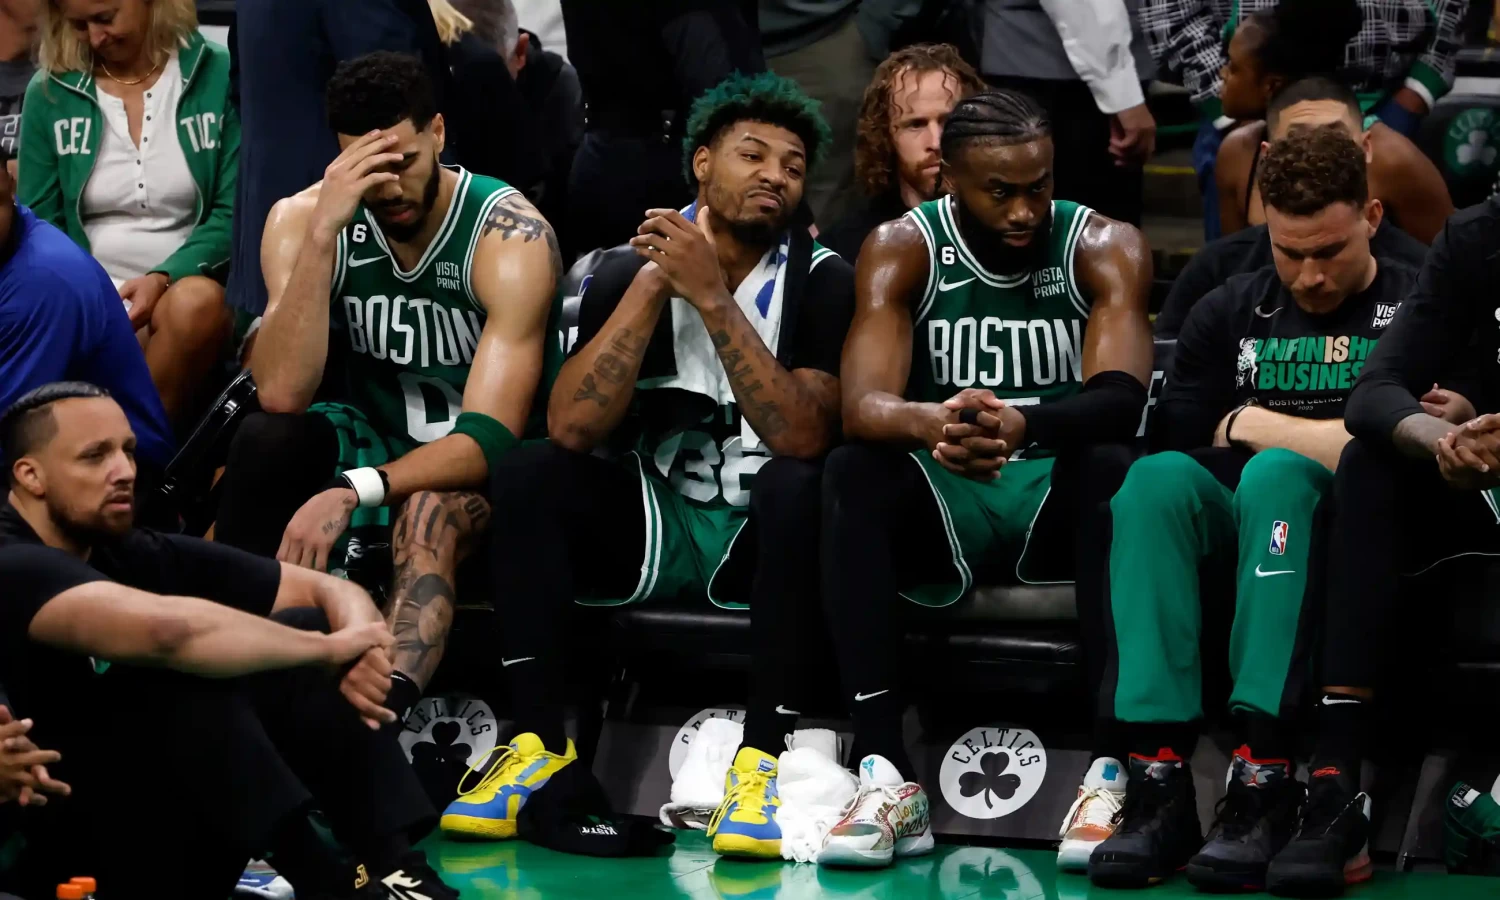 The Boston Celtics take in their loss to the Miami Heat in the Eastern Conference finals. Photograph: Winslow Townson/USA Today Sports